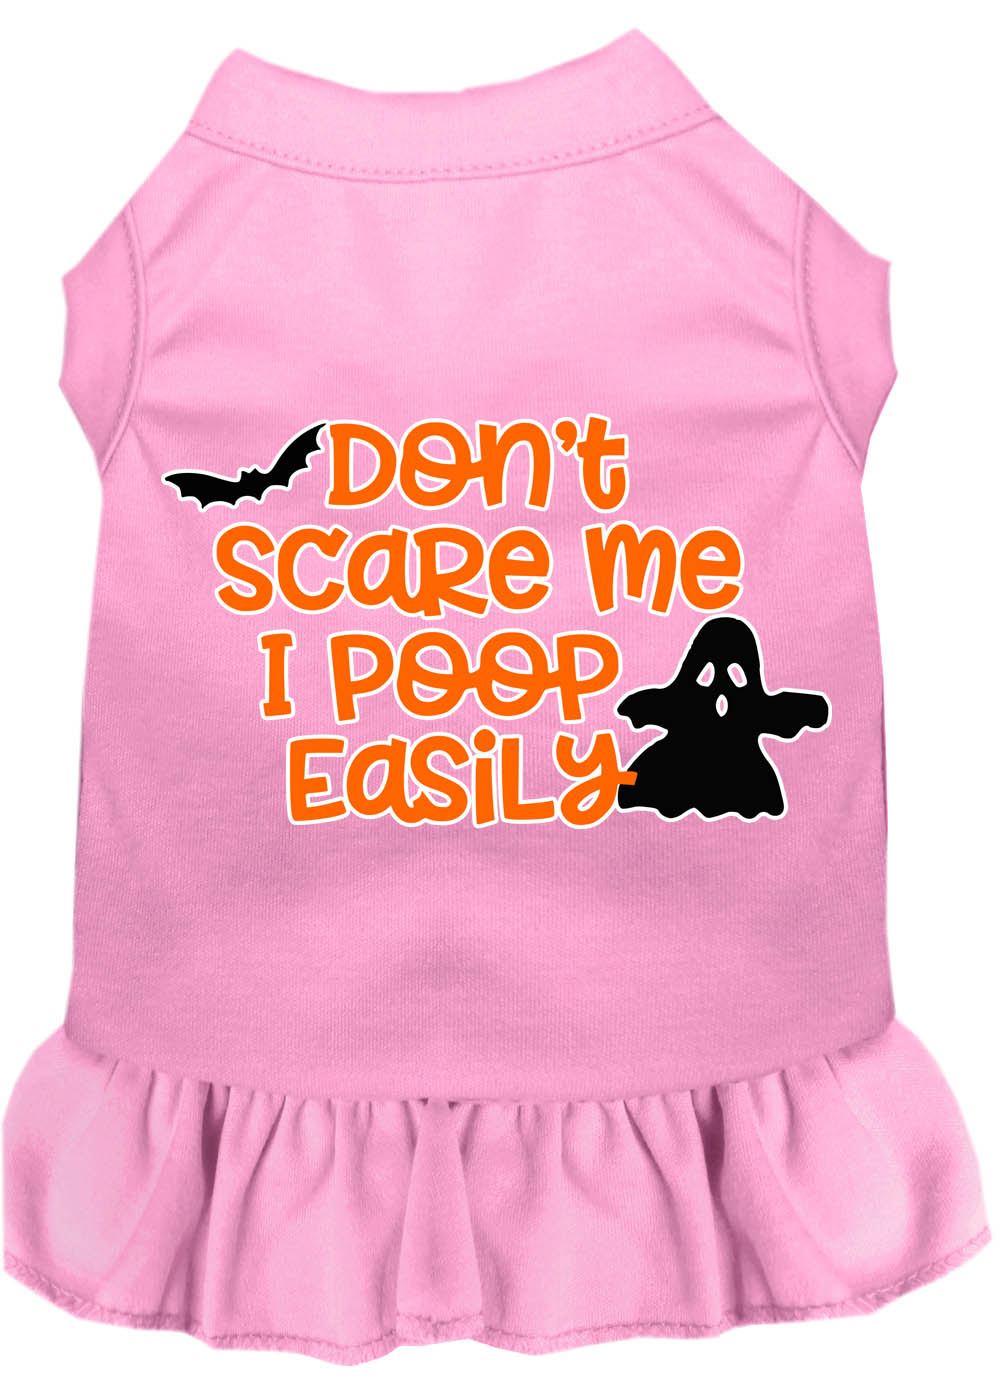 Don't Scare Me, Poops Easily Screen Print Dog Dress Light Pink XS